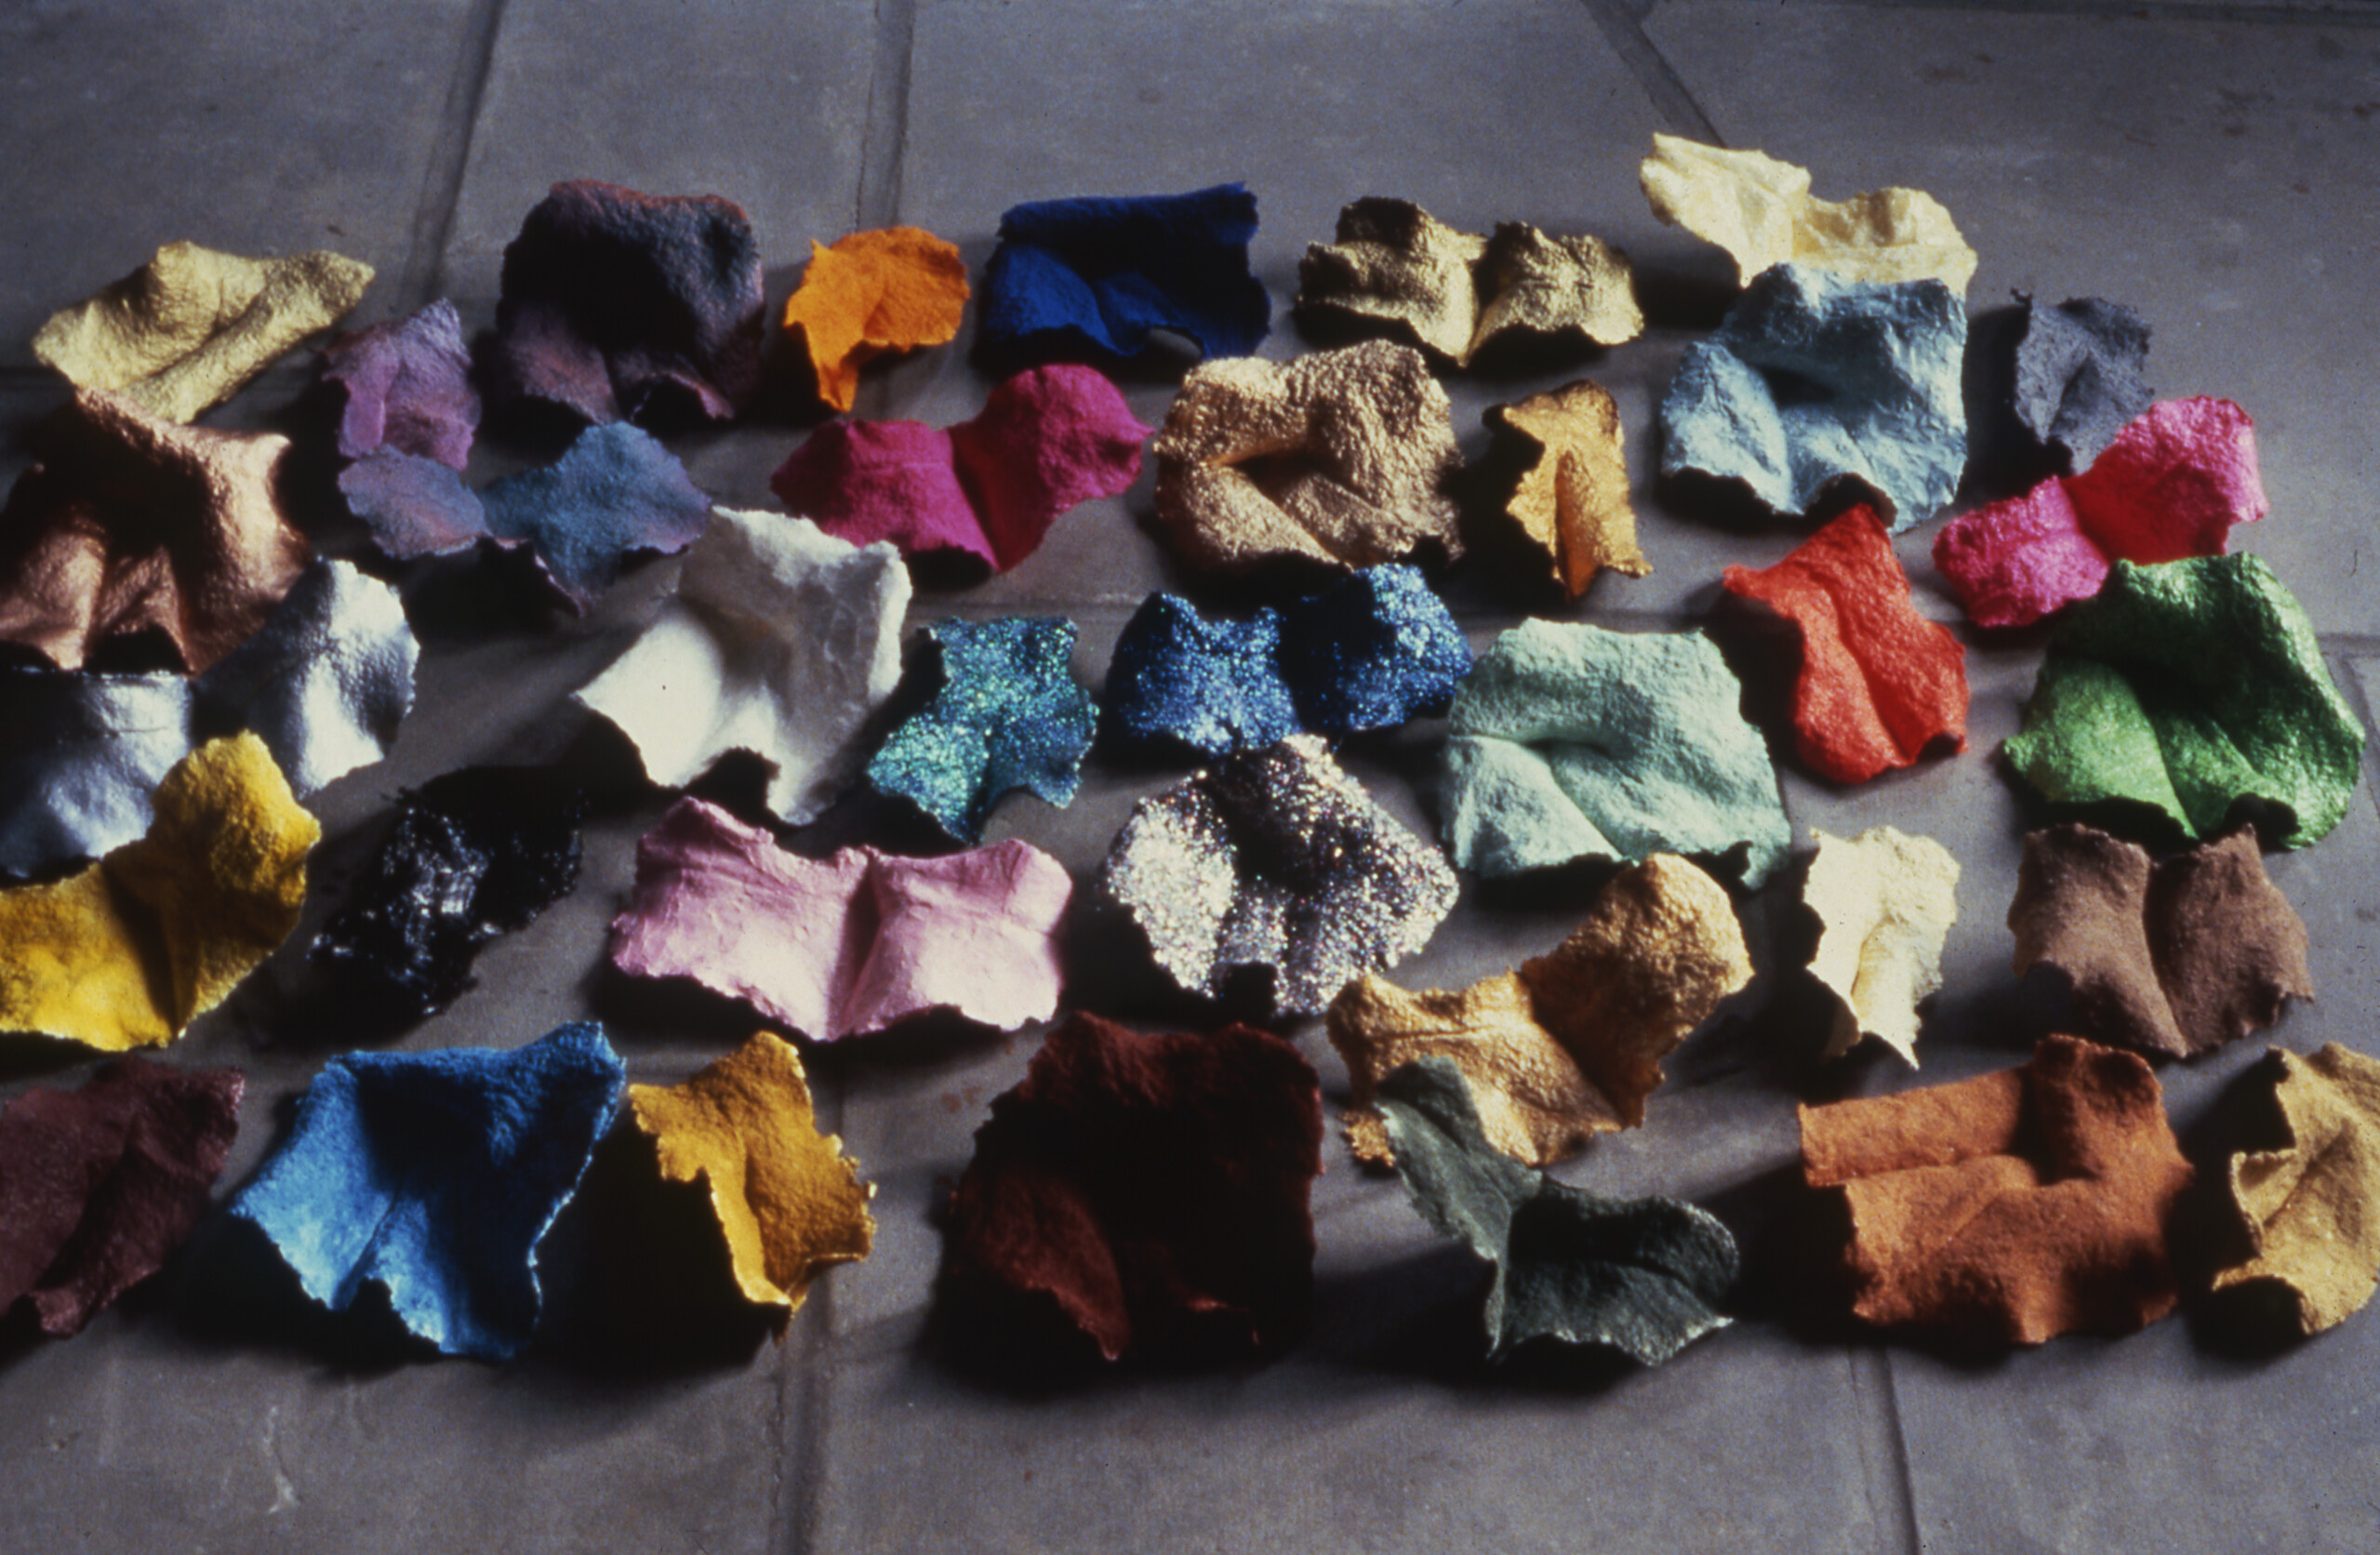 A cluster of homemade paper fragments in a variety of saturated colors sit on a tile floor. Some fragments are matte and some have glitter embedded in the paper.